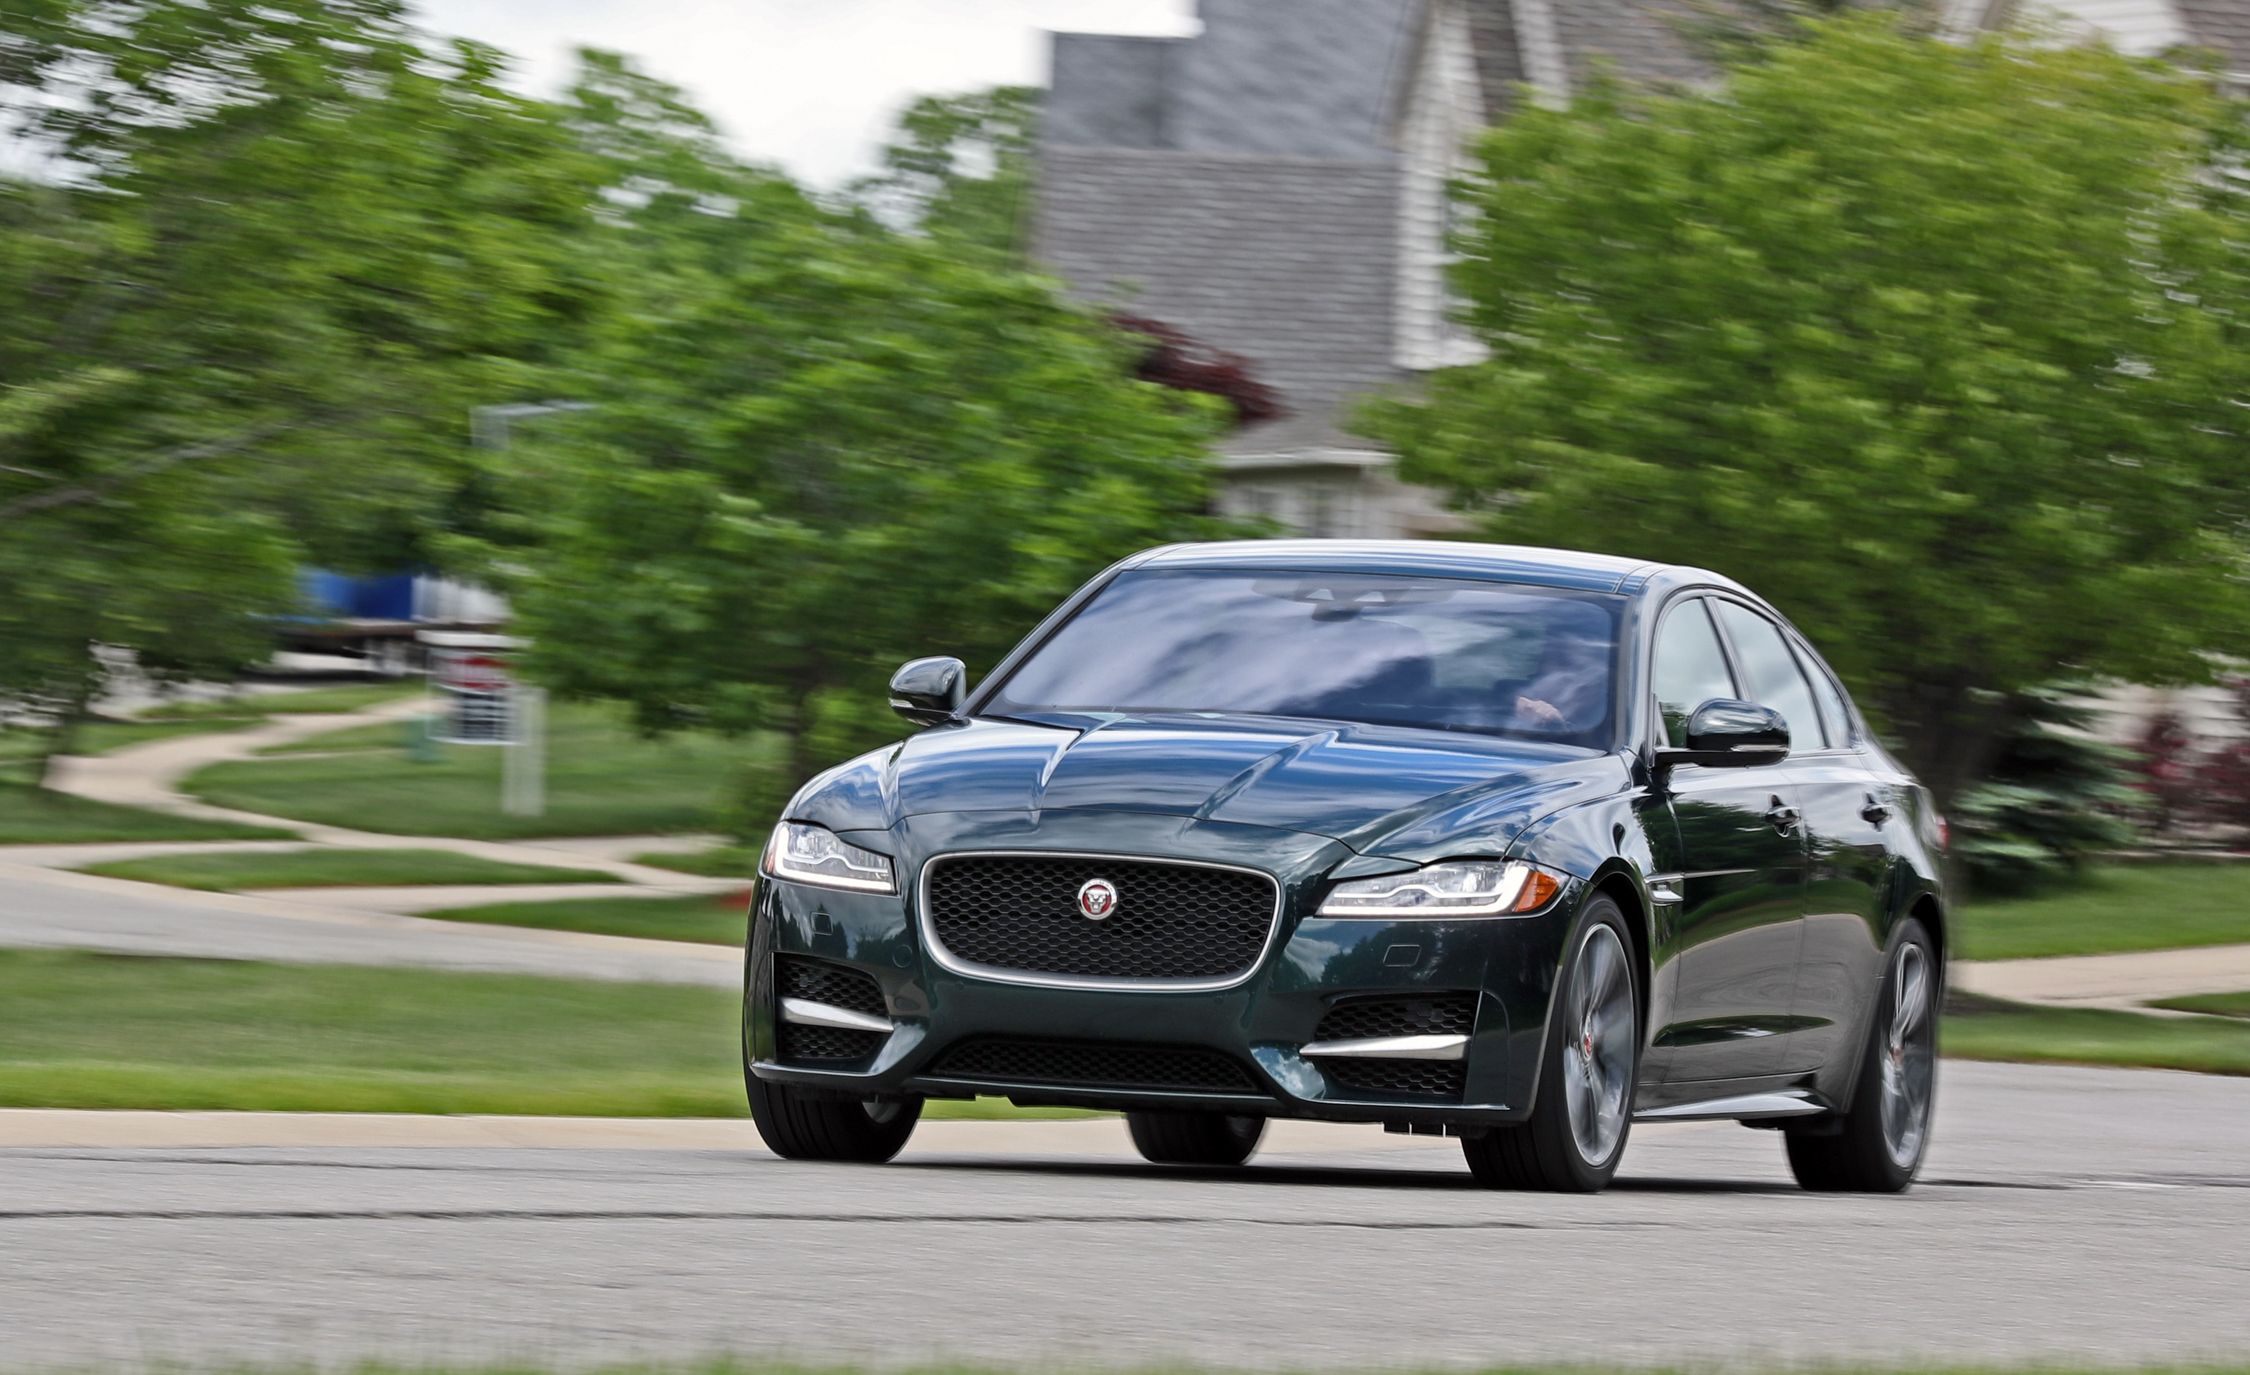 2017 Jaguar XF review: Supercharged V6, sharp handling and tech